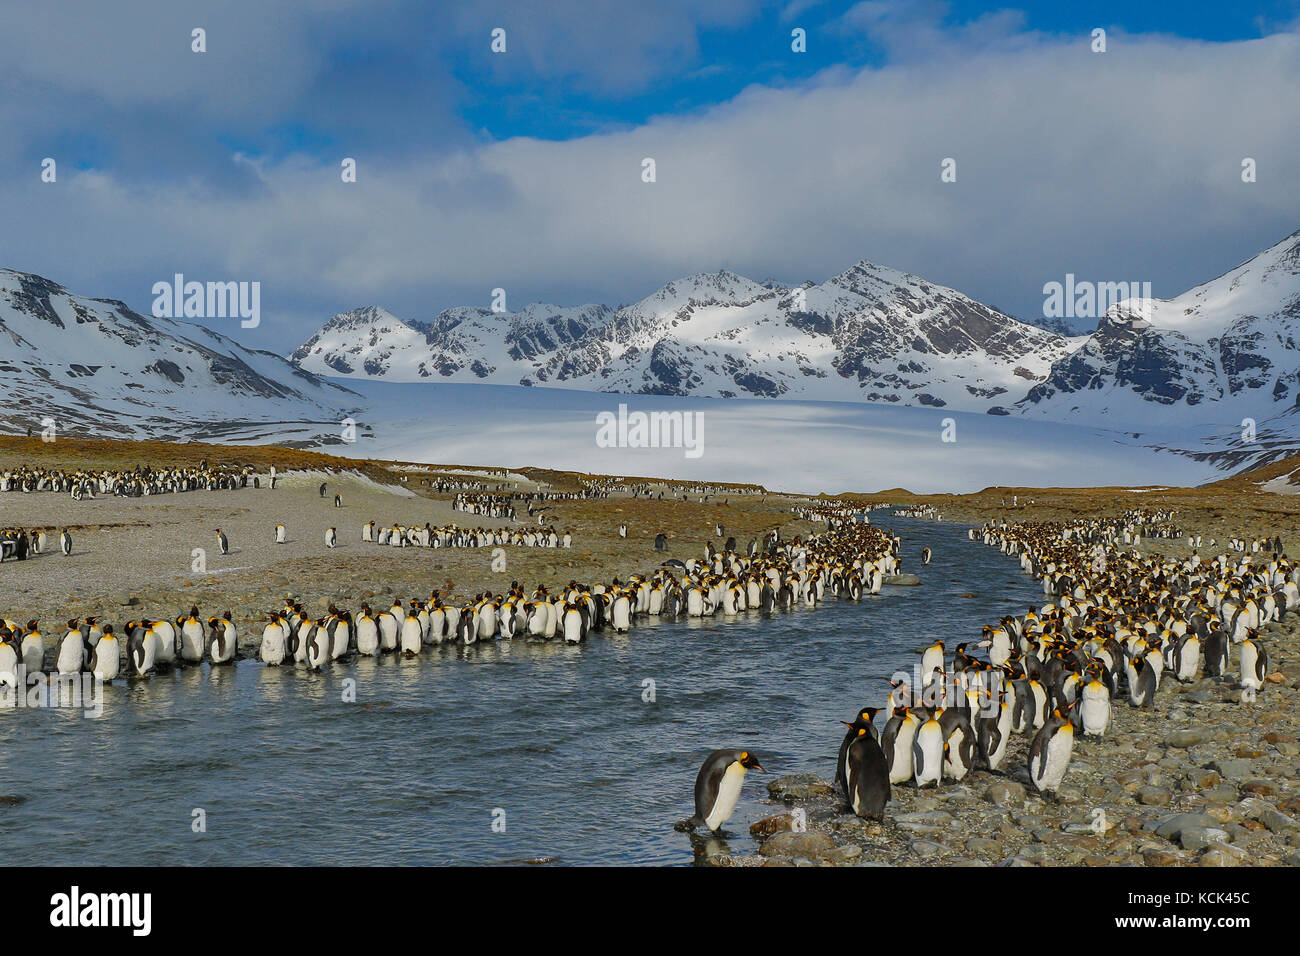 Large  colony of King Penguins (Aptenodytes patagonicus) gathered on a rocky beach on South Georgia Island. Stock Photo